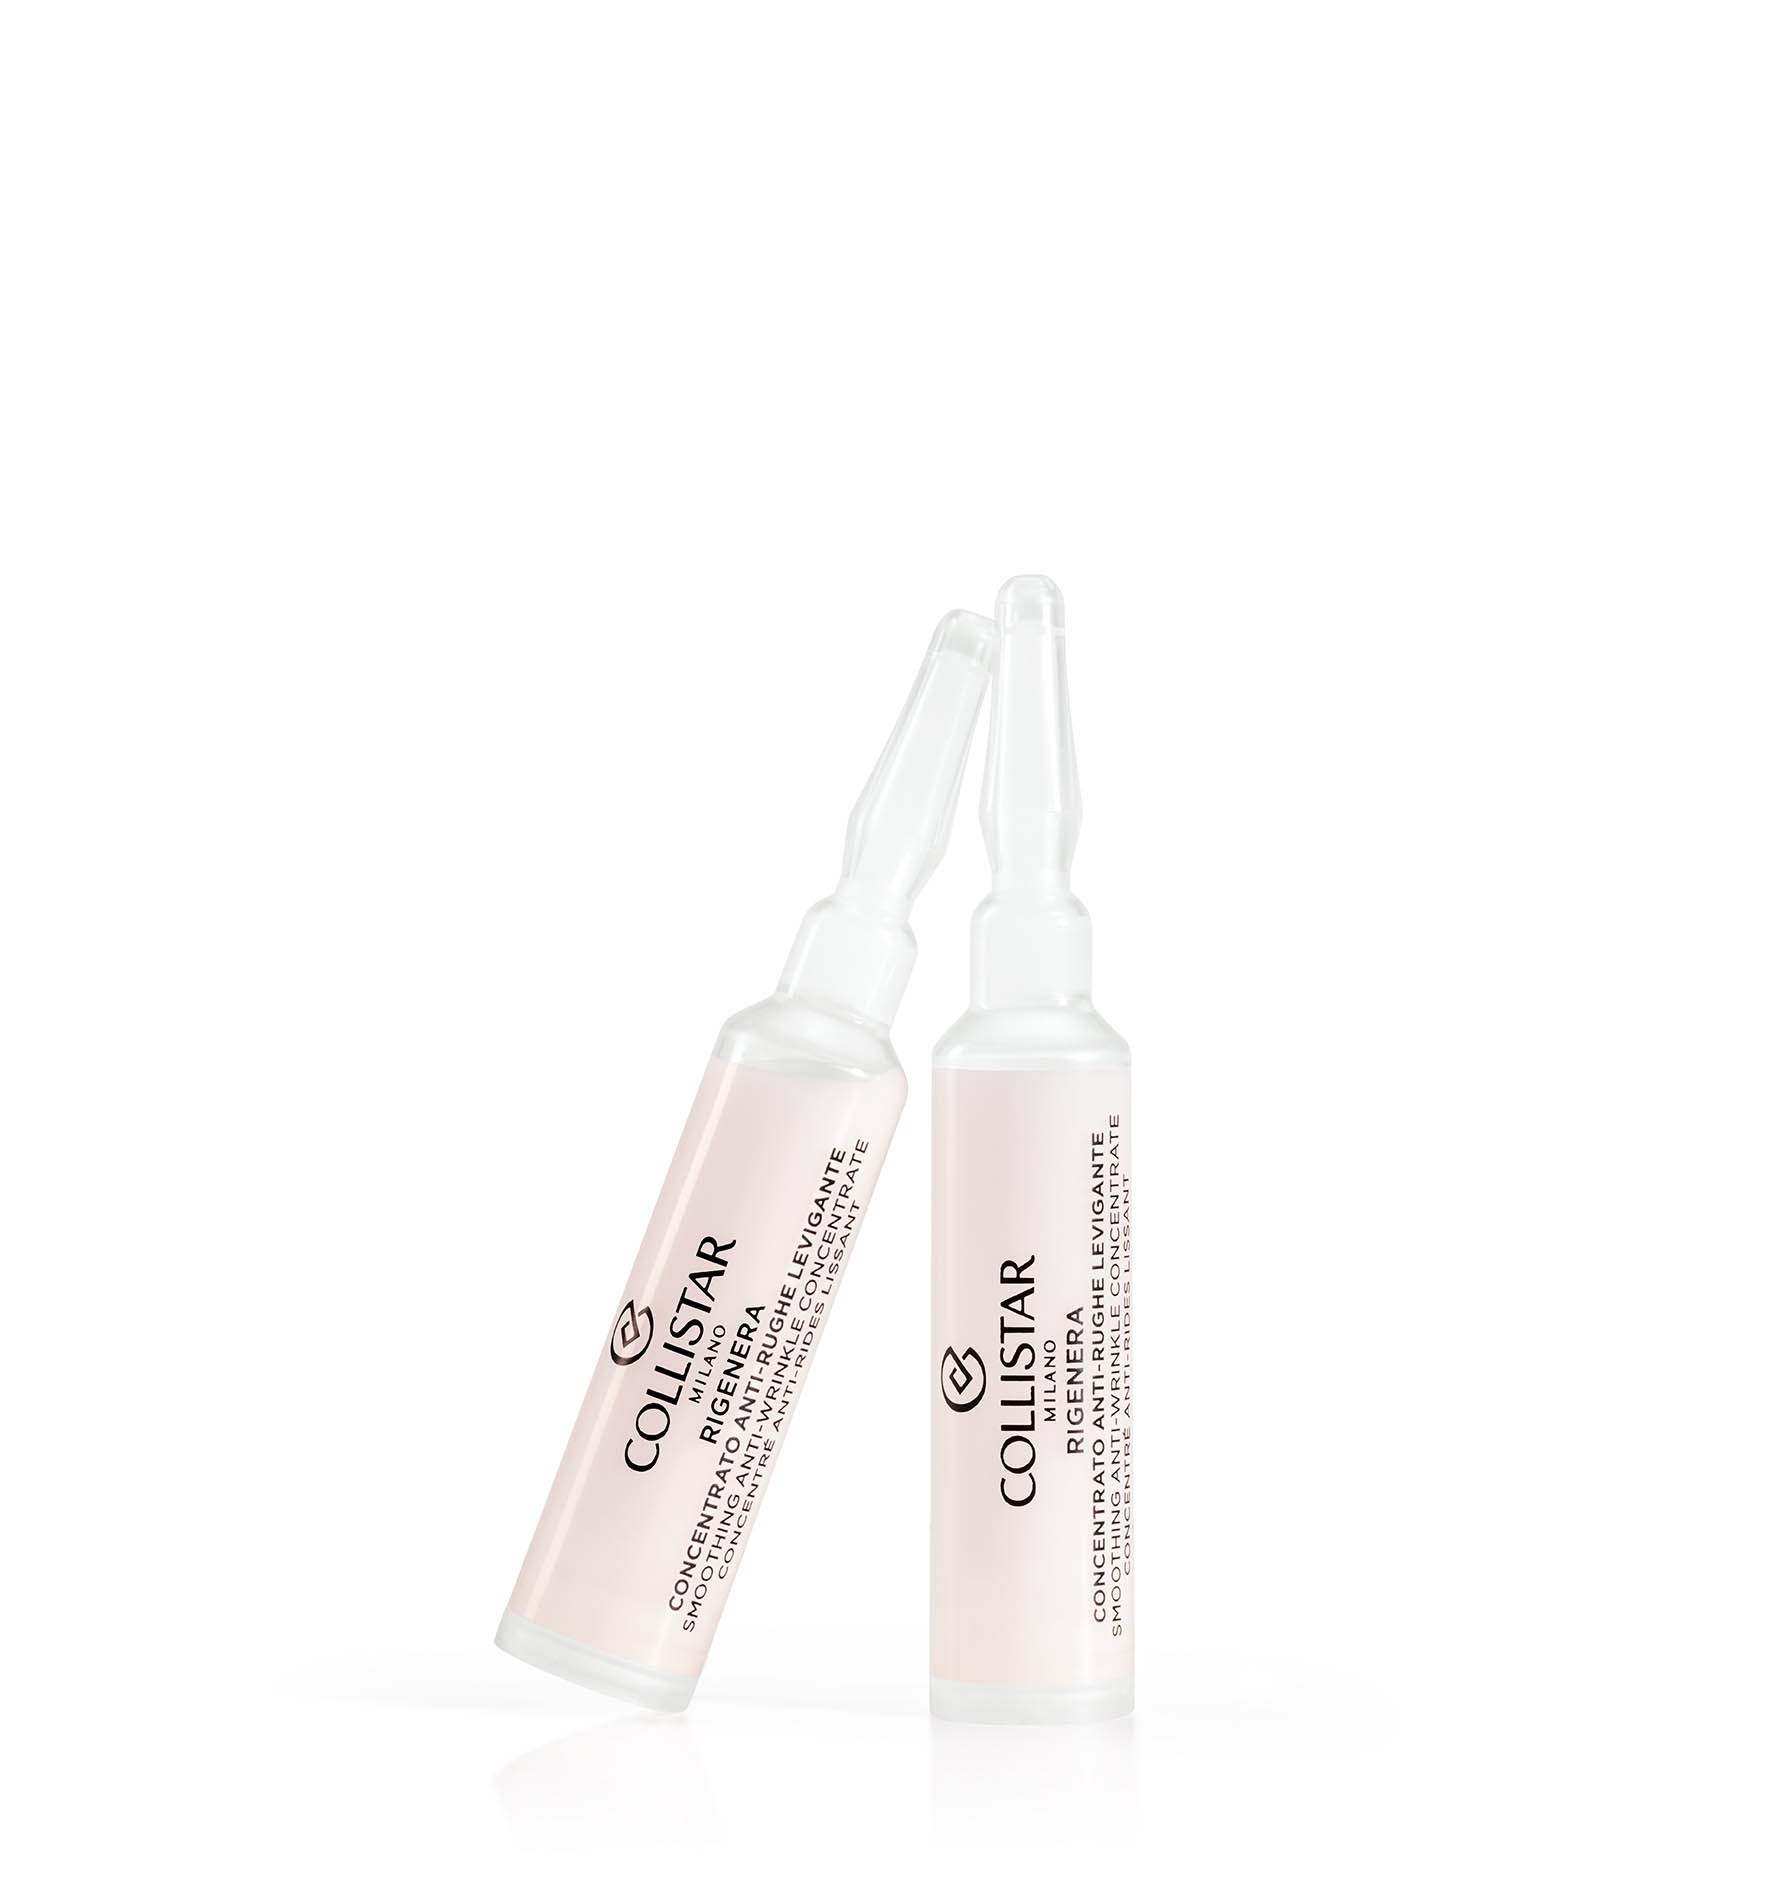 RIGENERA SMOOTHING ANTI-WRINKLE
CONCENTRATE - Anti-age | Collistar - Shop Online Ufficiale